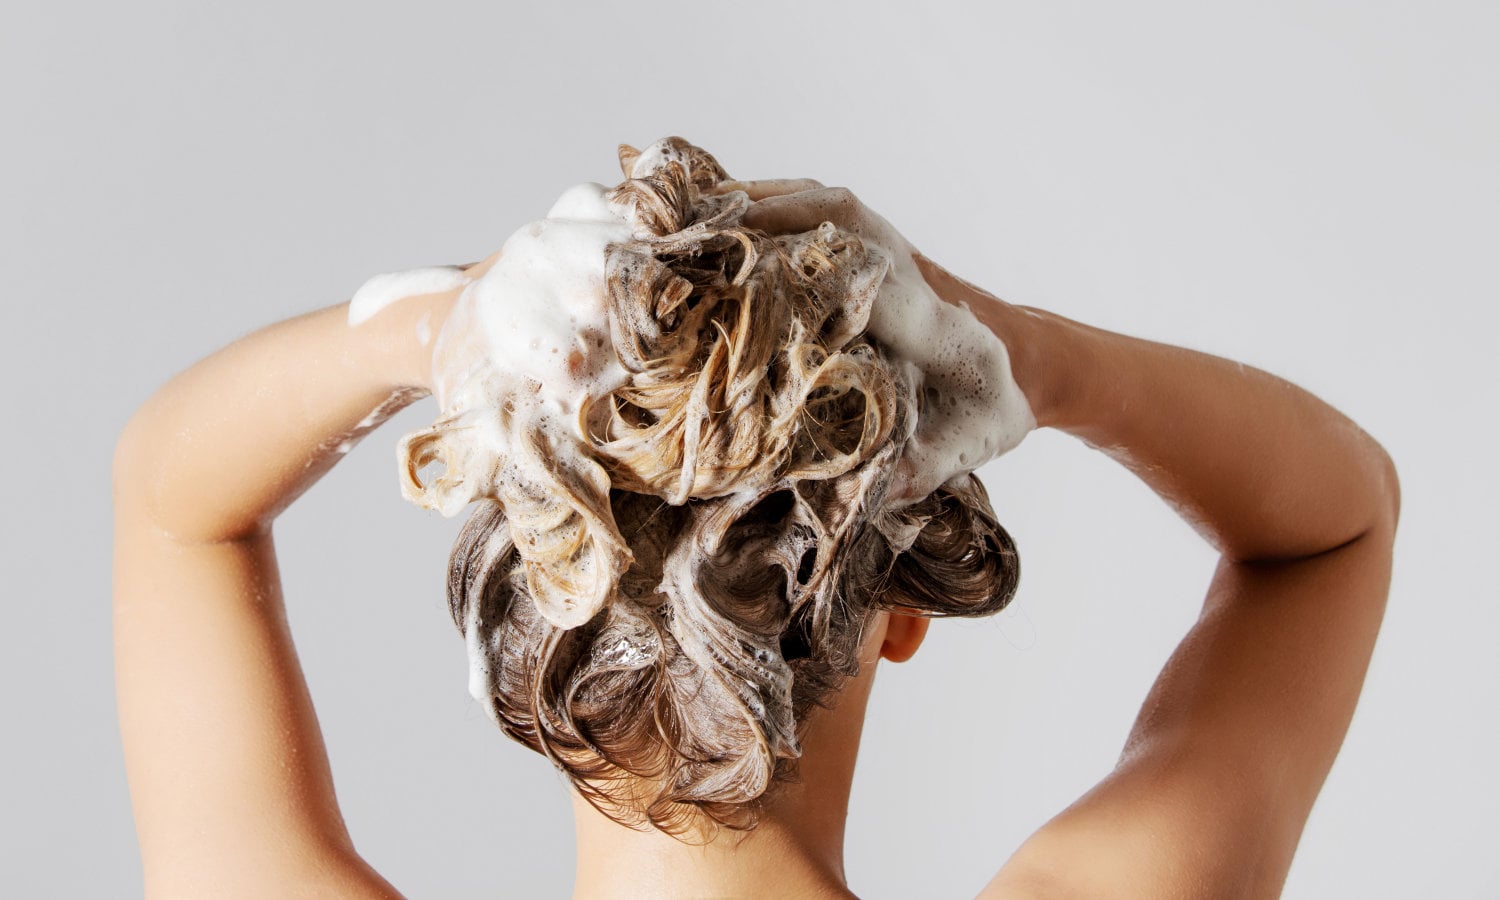 Shampoo Ingredients to Avoid